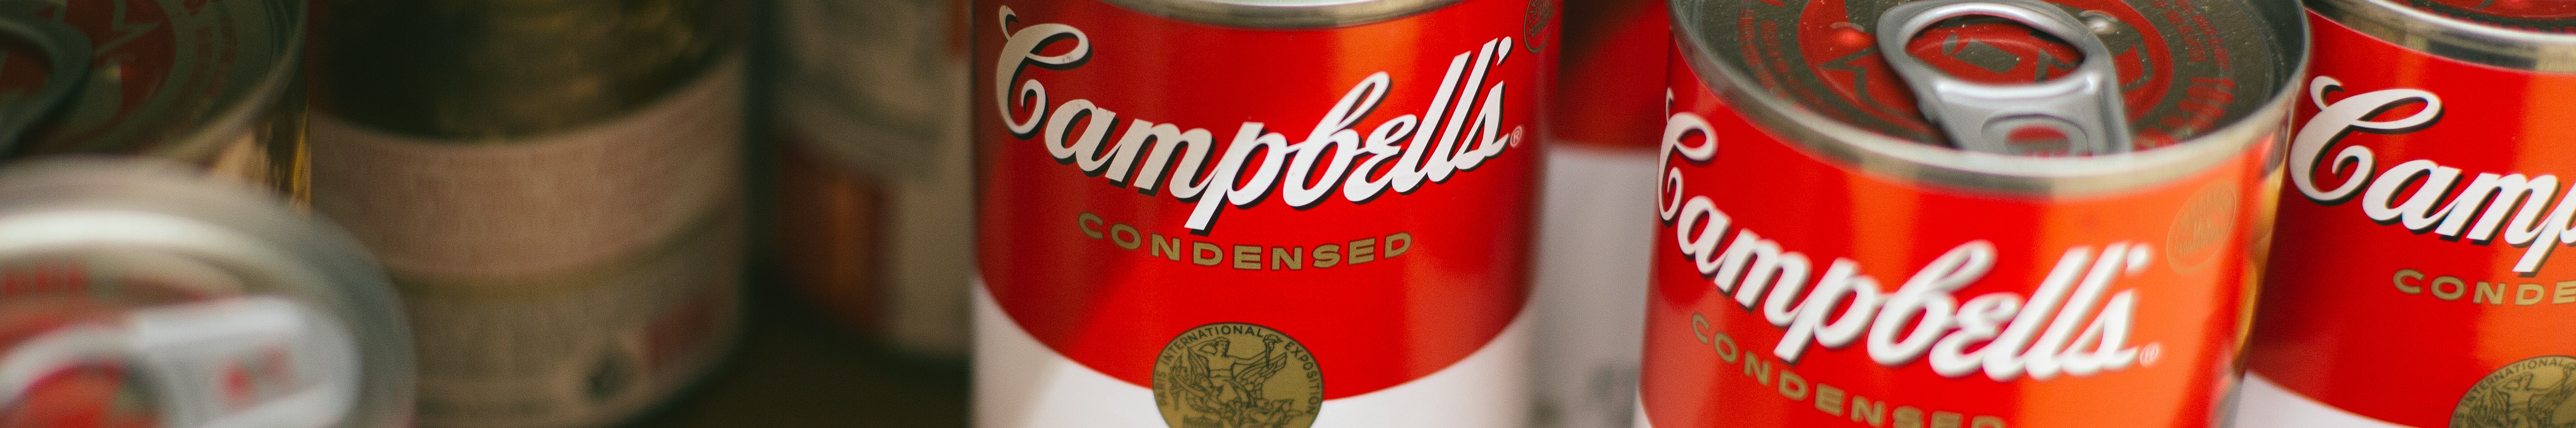 Campbell derived most of its sales from products high in sodium & sugar